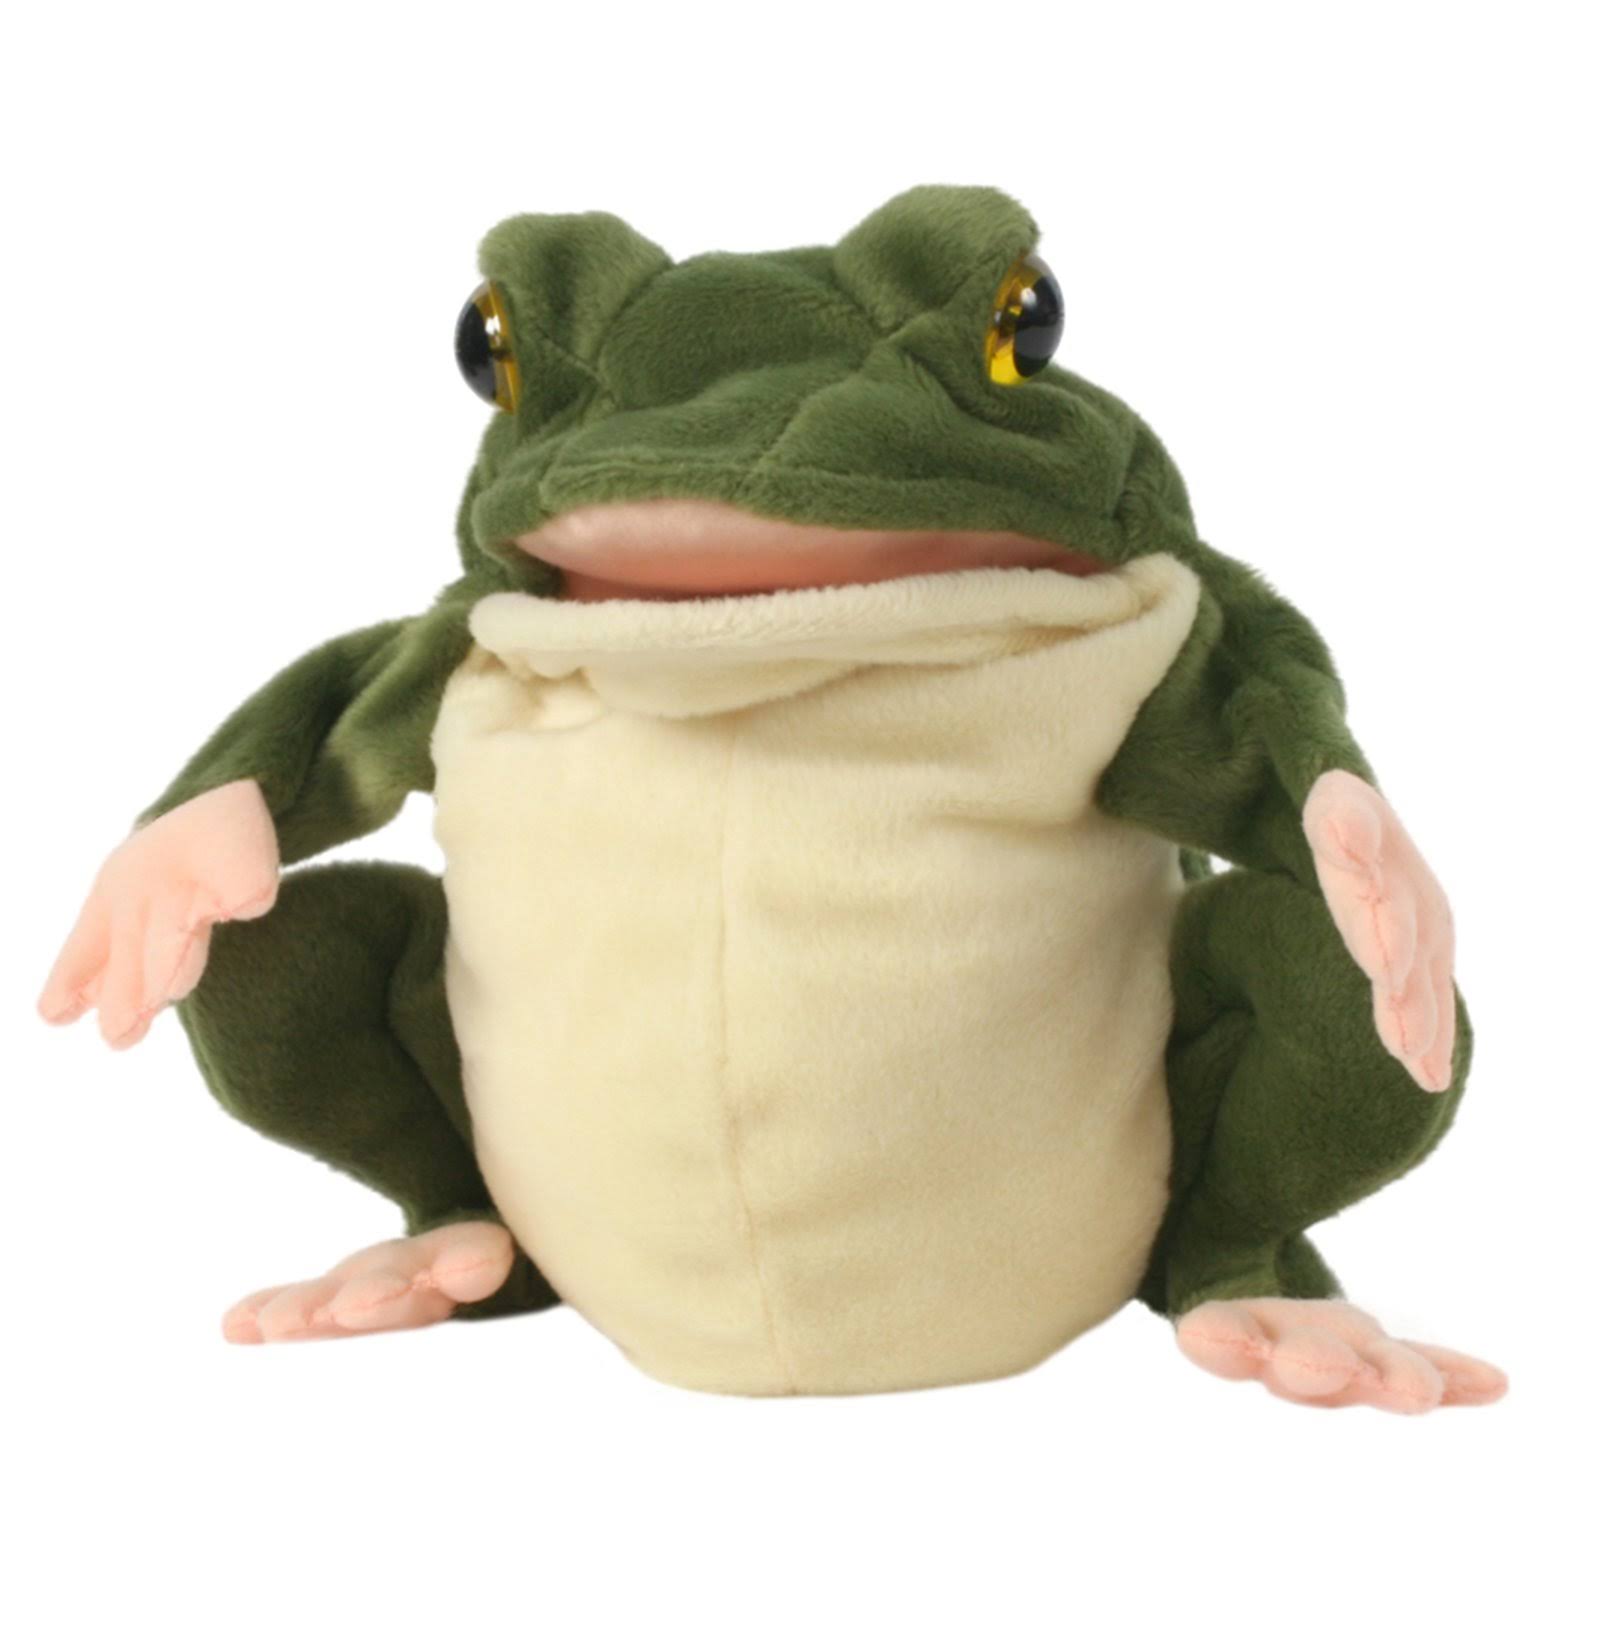 The Puppet Company Hand Puppets Frog